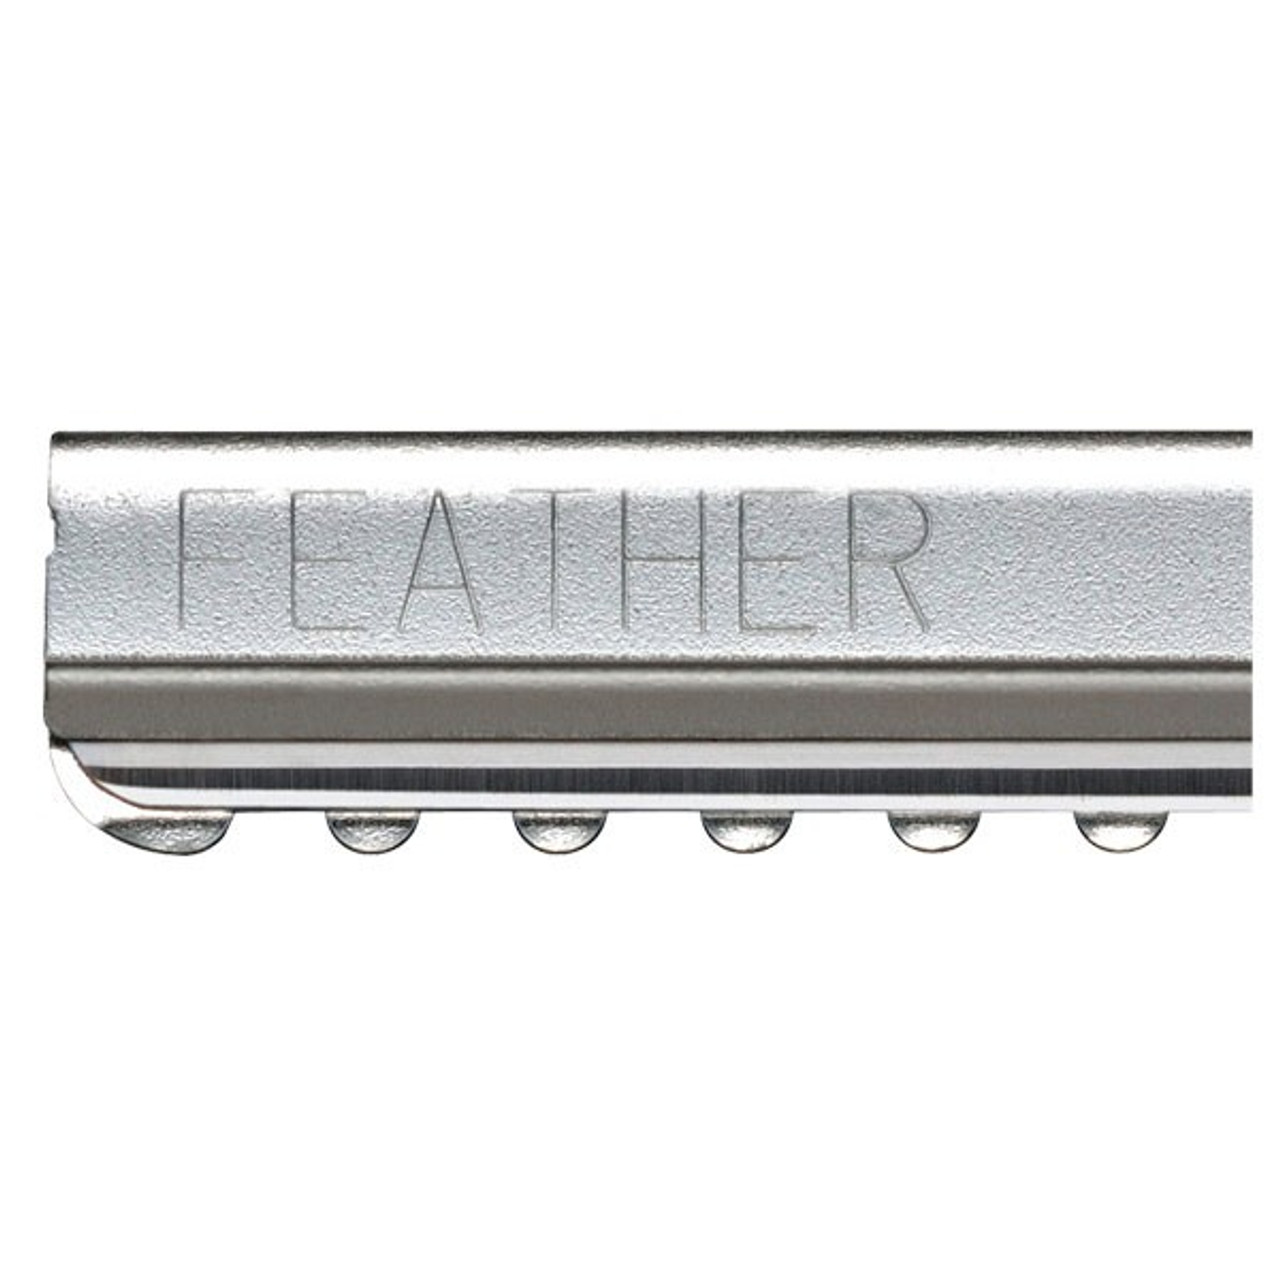 Feather Razor Blades (1 Pack of 5 Blades) – Stirling Soap Company